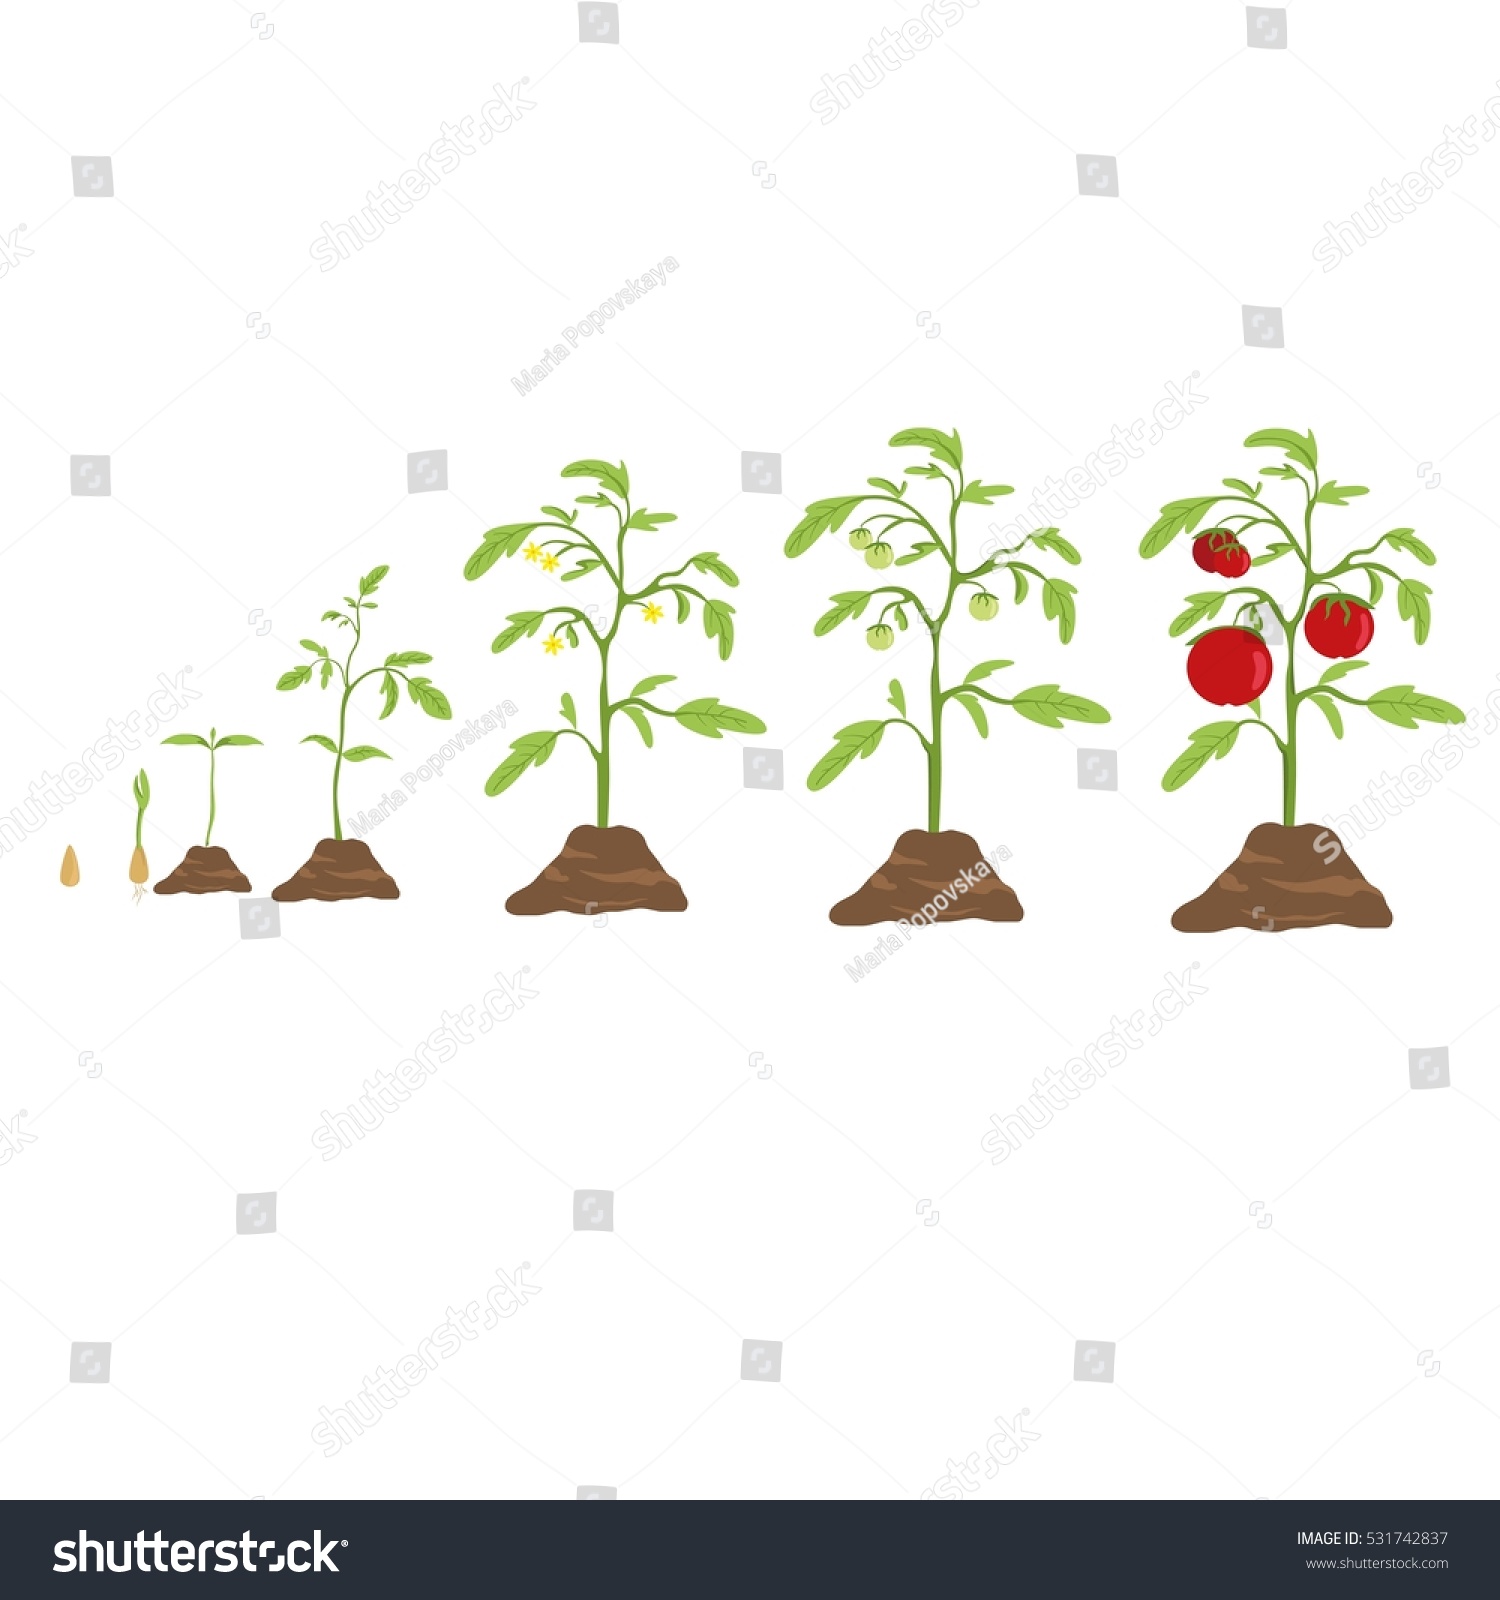 Tomato Grow Cycle Small Seed Big Stock Vector 531742837 - Shutterstock